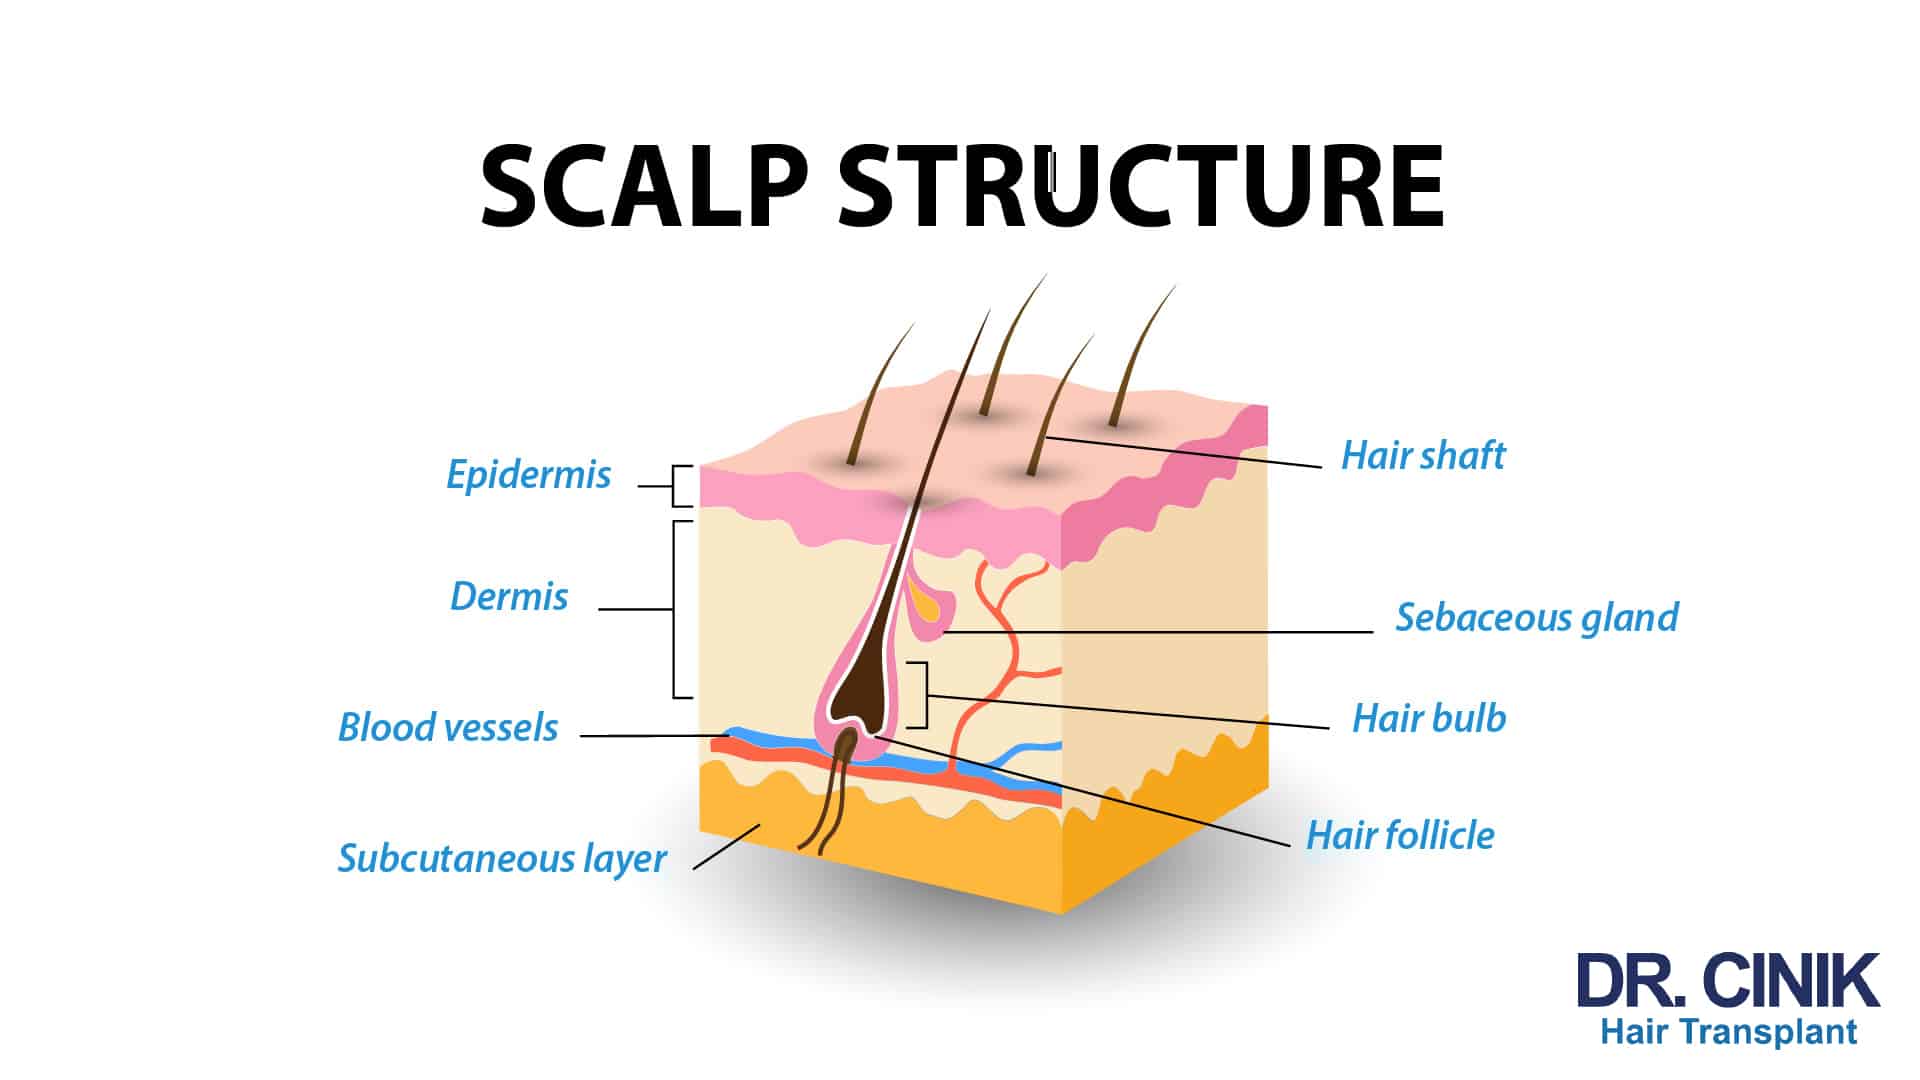 Sectional view of the structure of the scalp